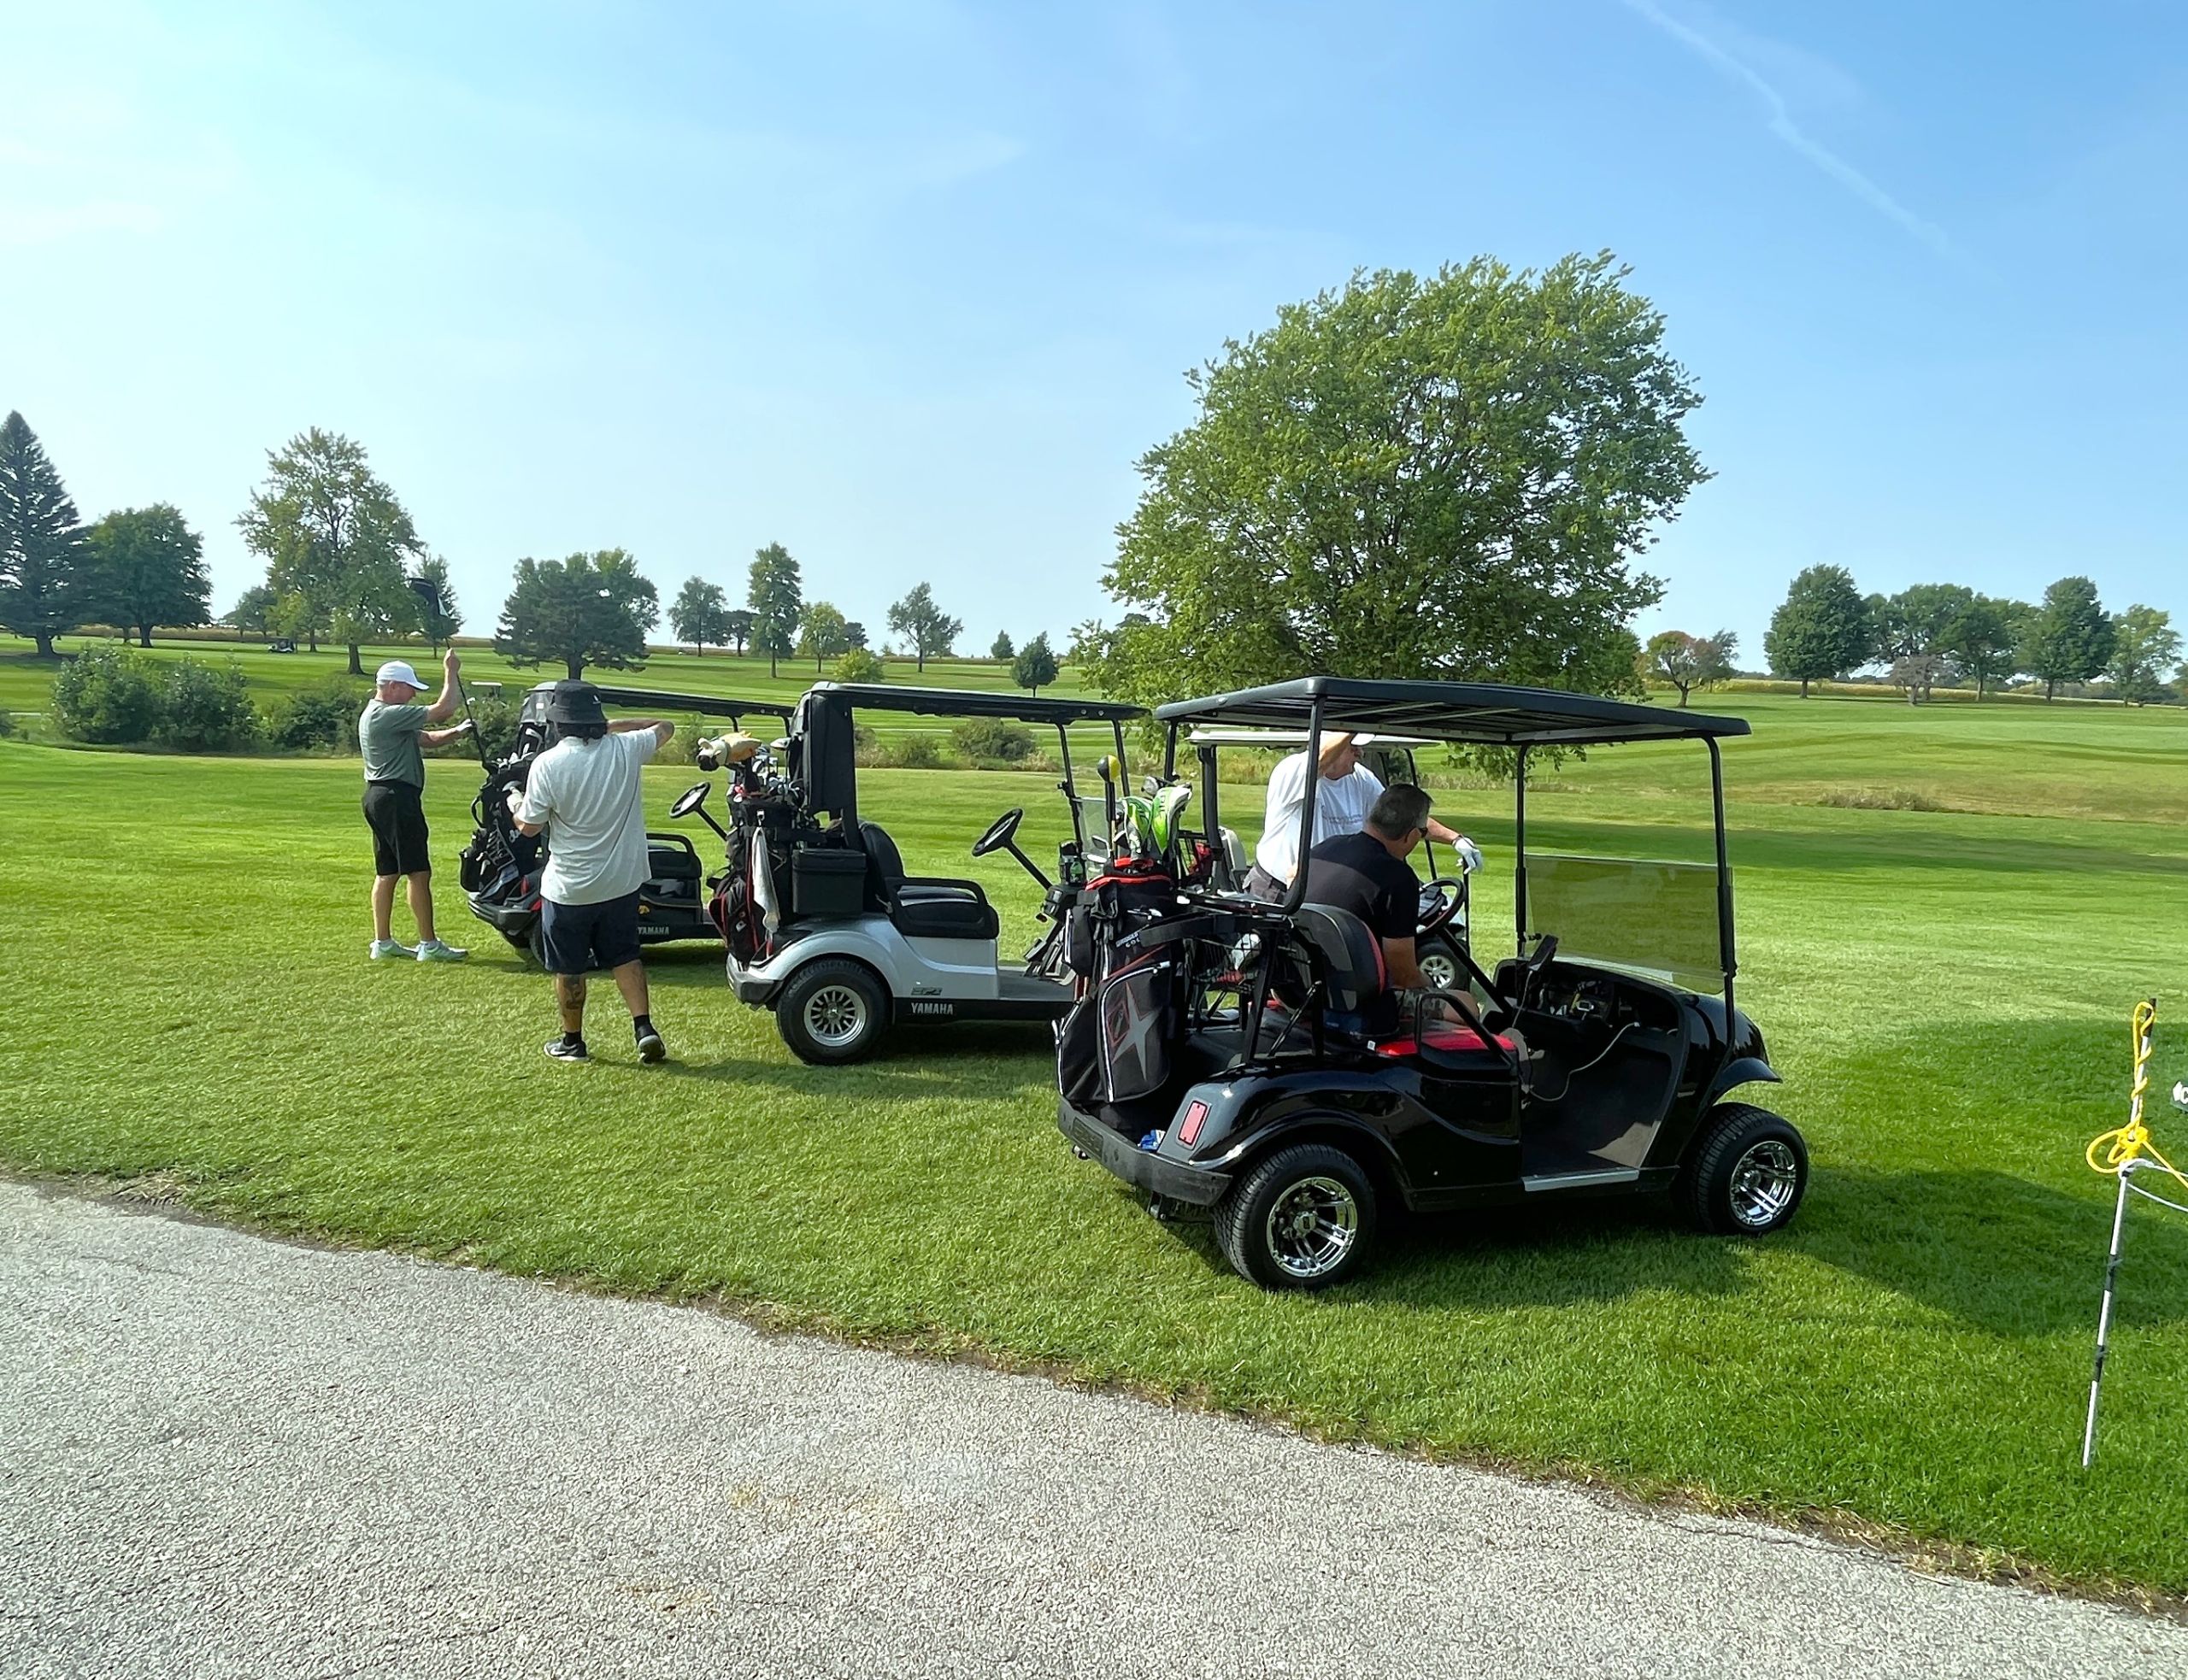 Three golf carts are lined up on a lakeside green with men preparing to play golf.